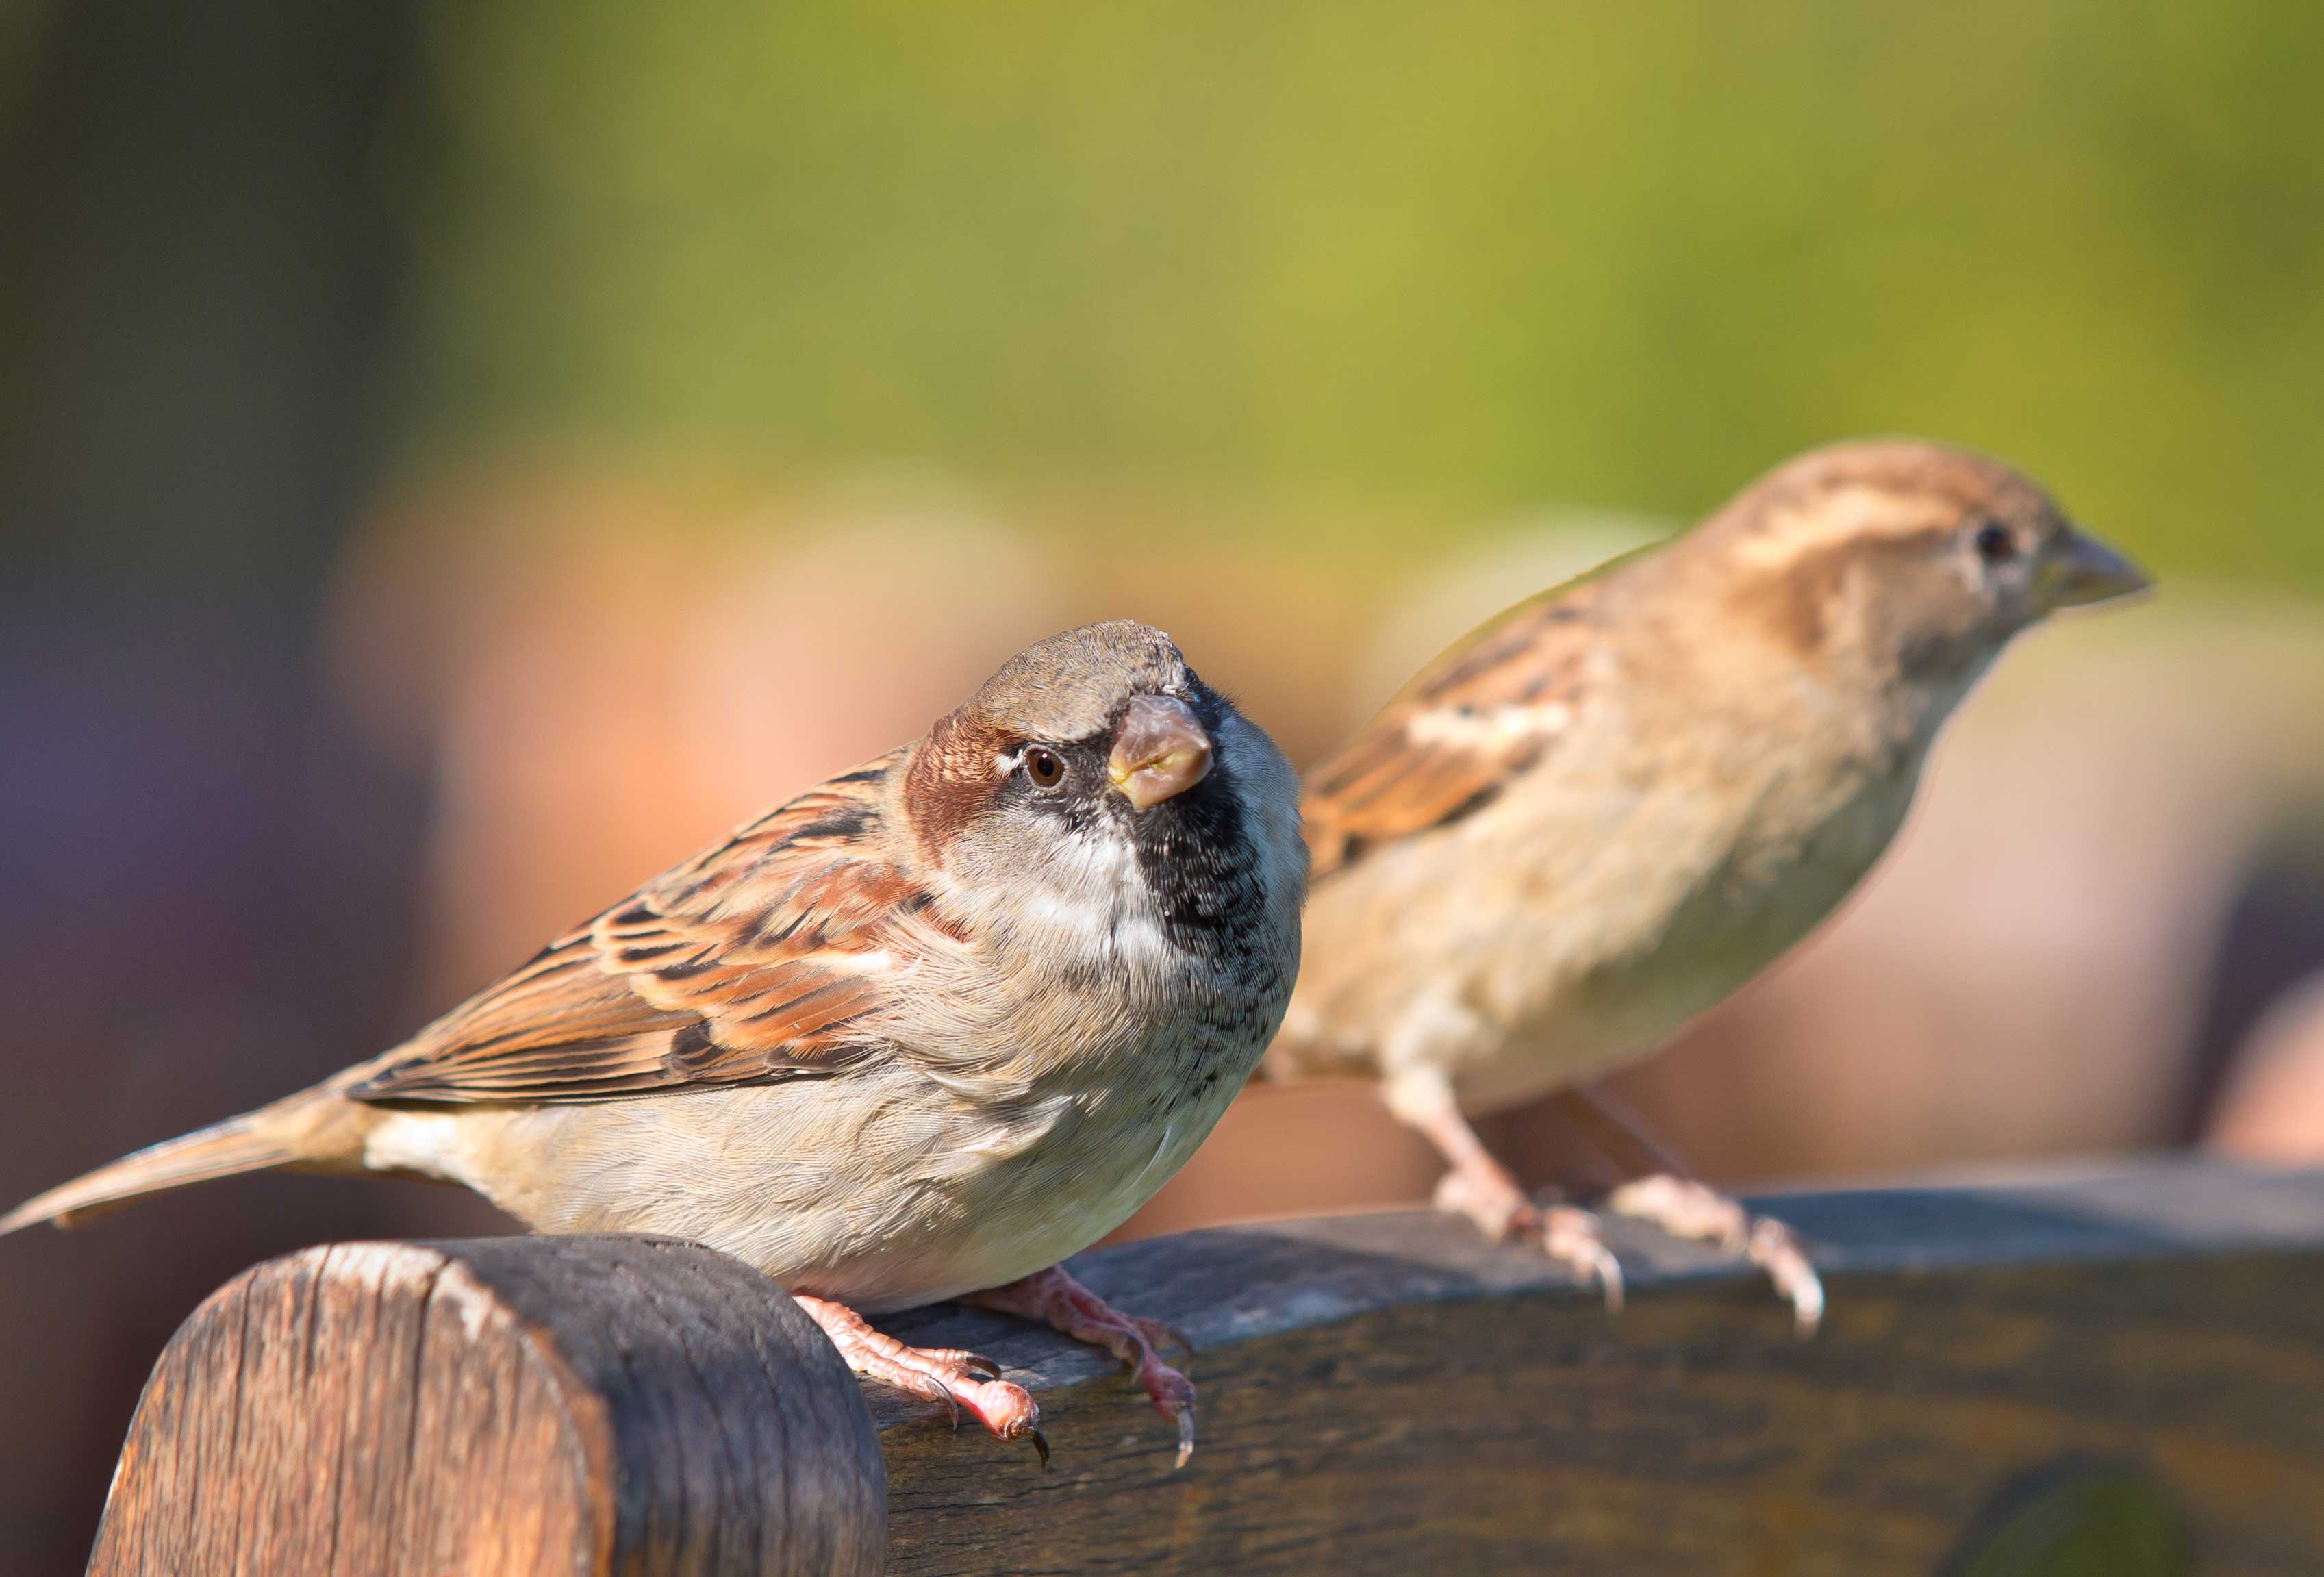 Closeup of two house sparrows.